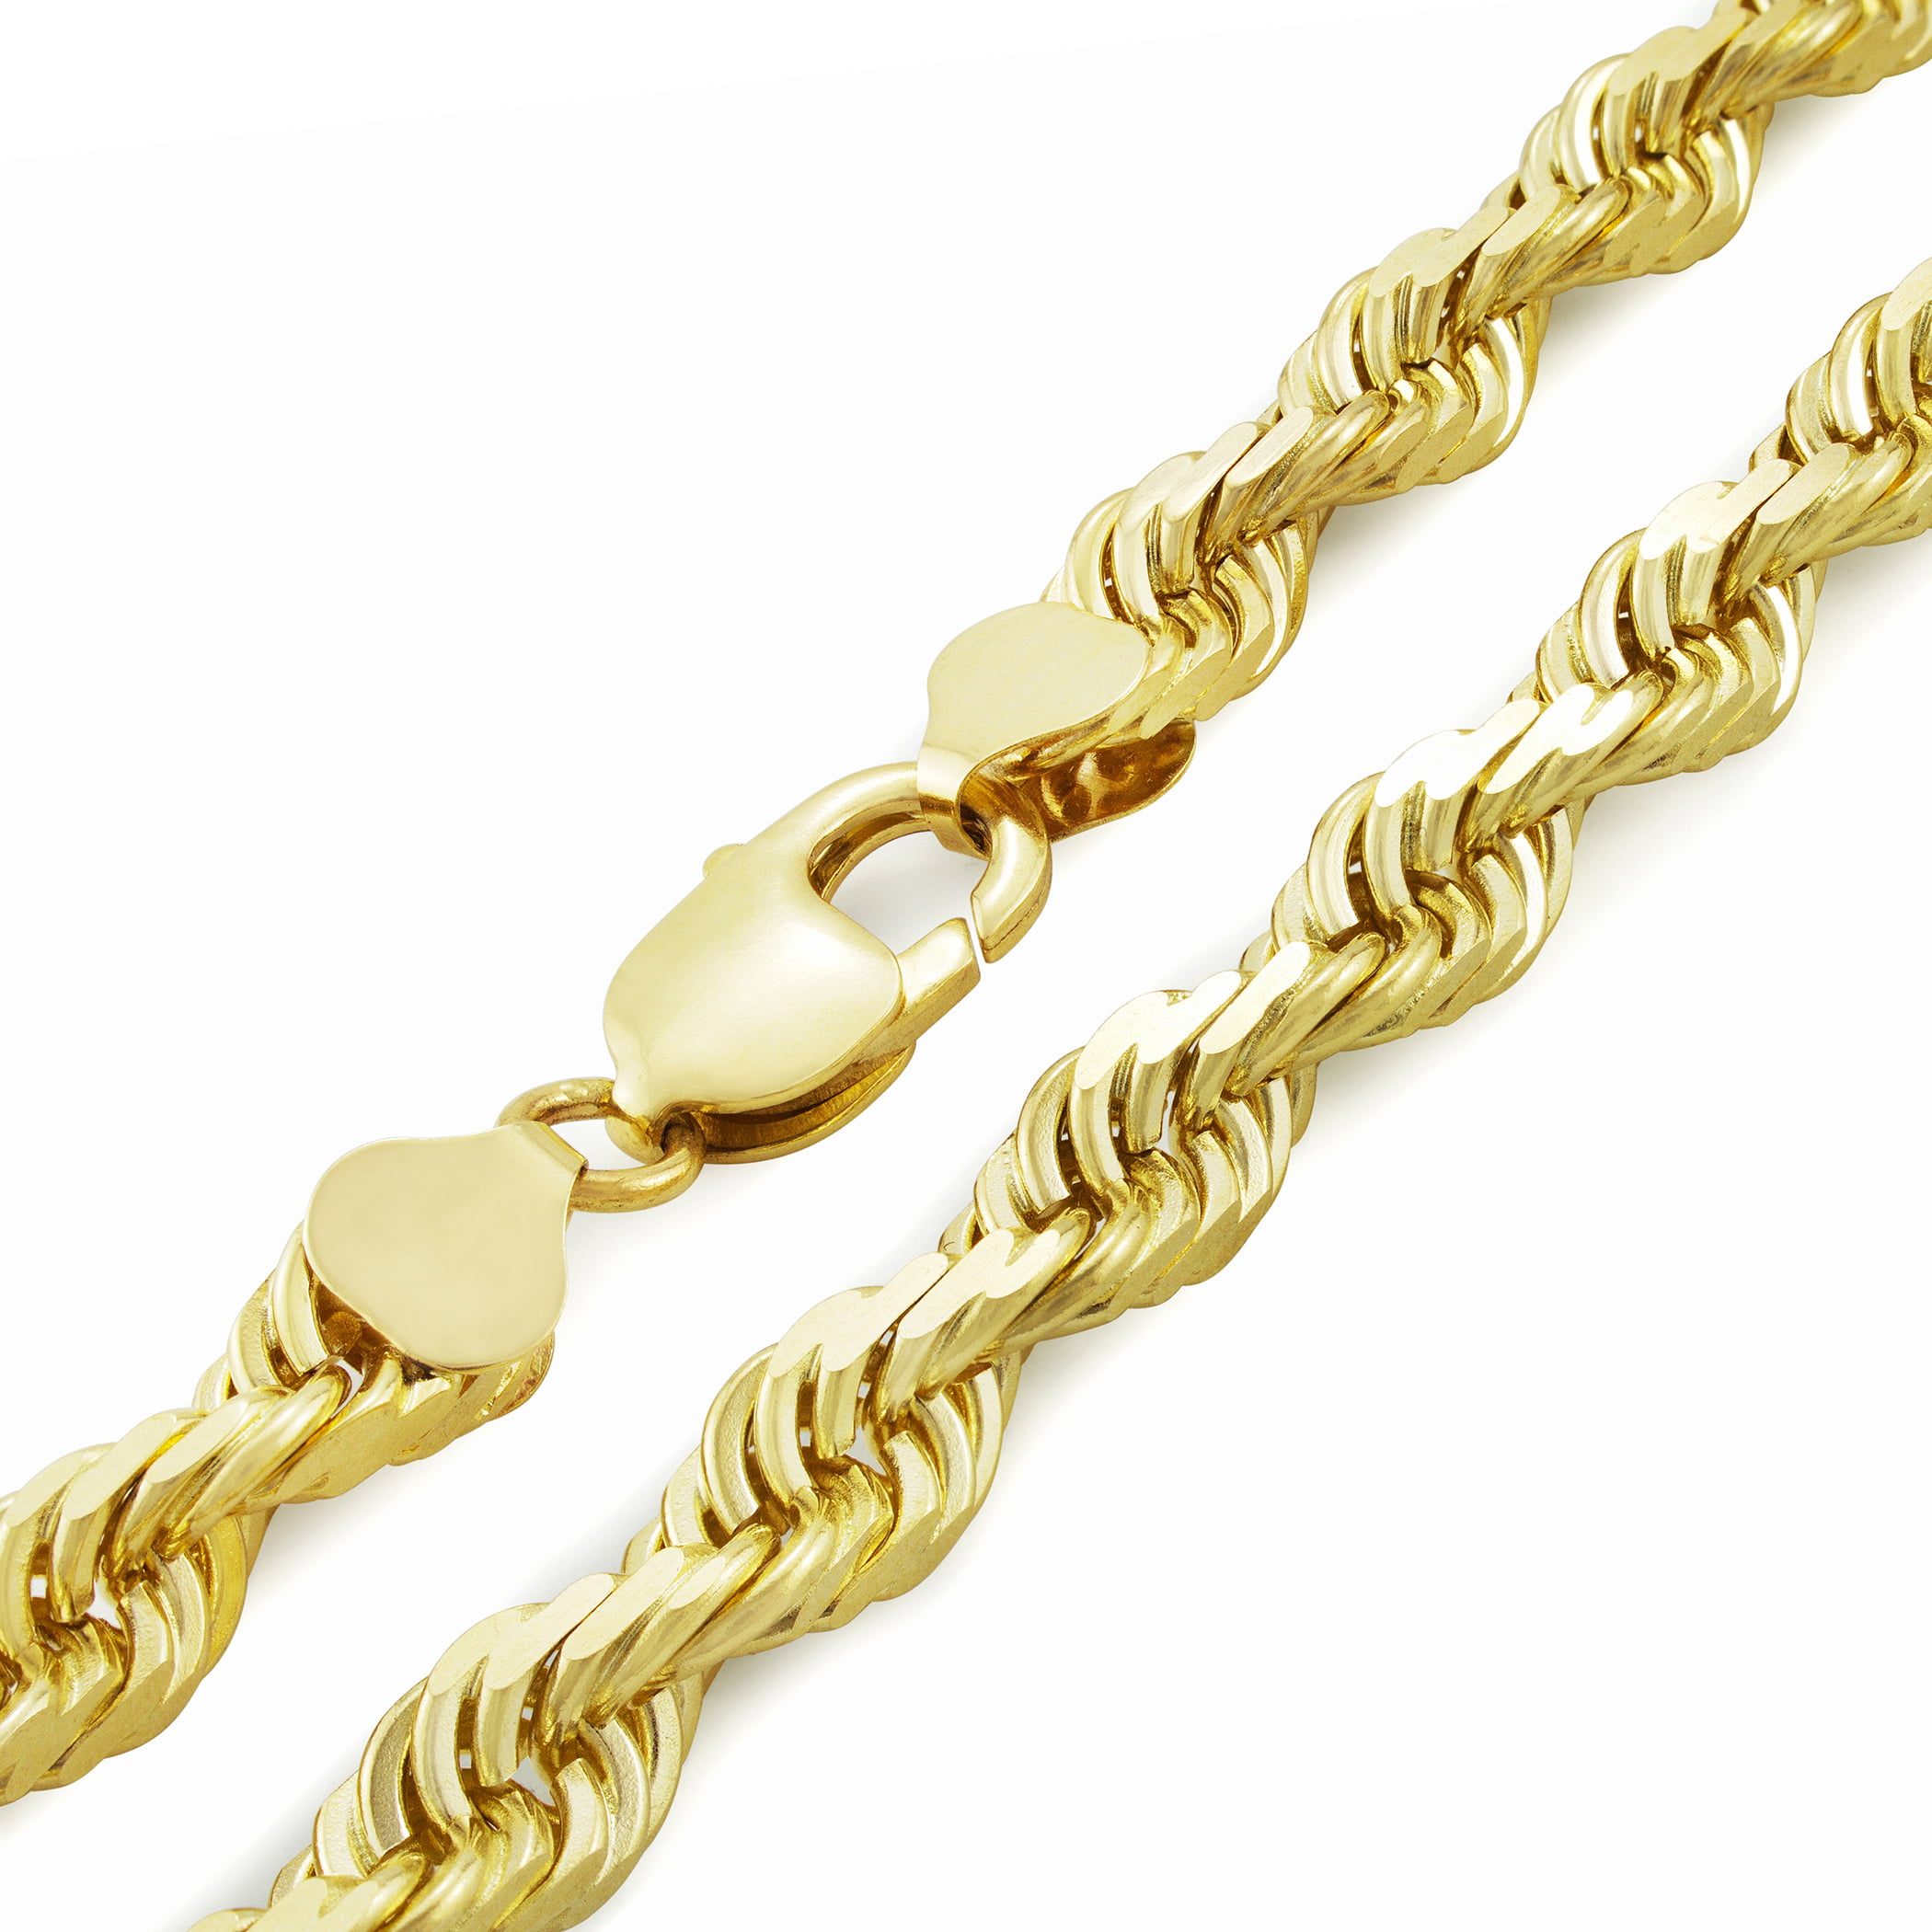 Details about   Real 10kt Yellow Gold 2.5mm Semi-Solid Figaro Chain; 26 inch 